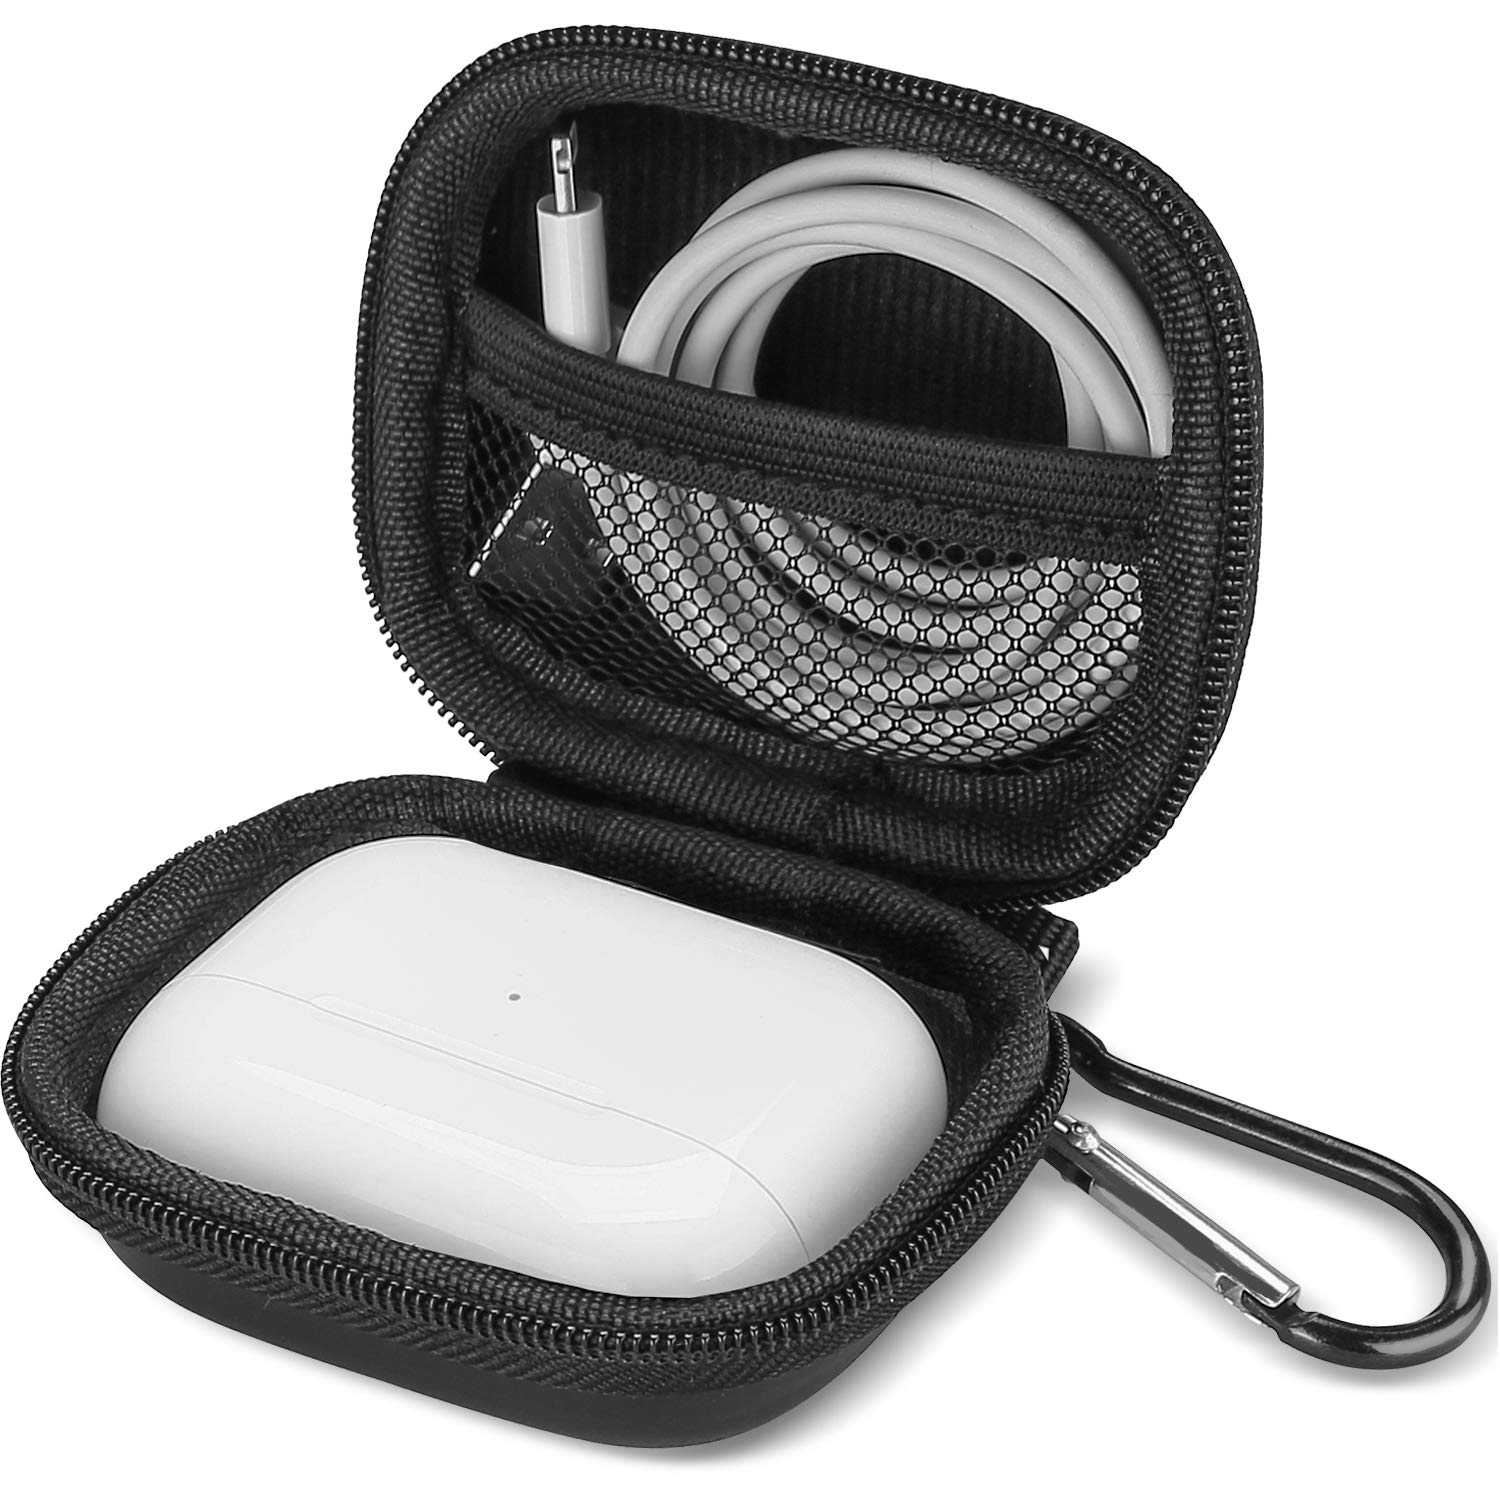 Travel Carrying Case for AirPods Pro Jabra Elite 75t Earbuds